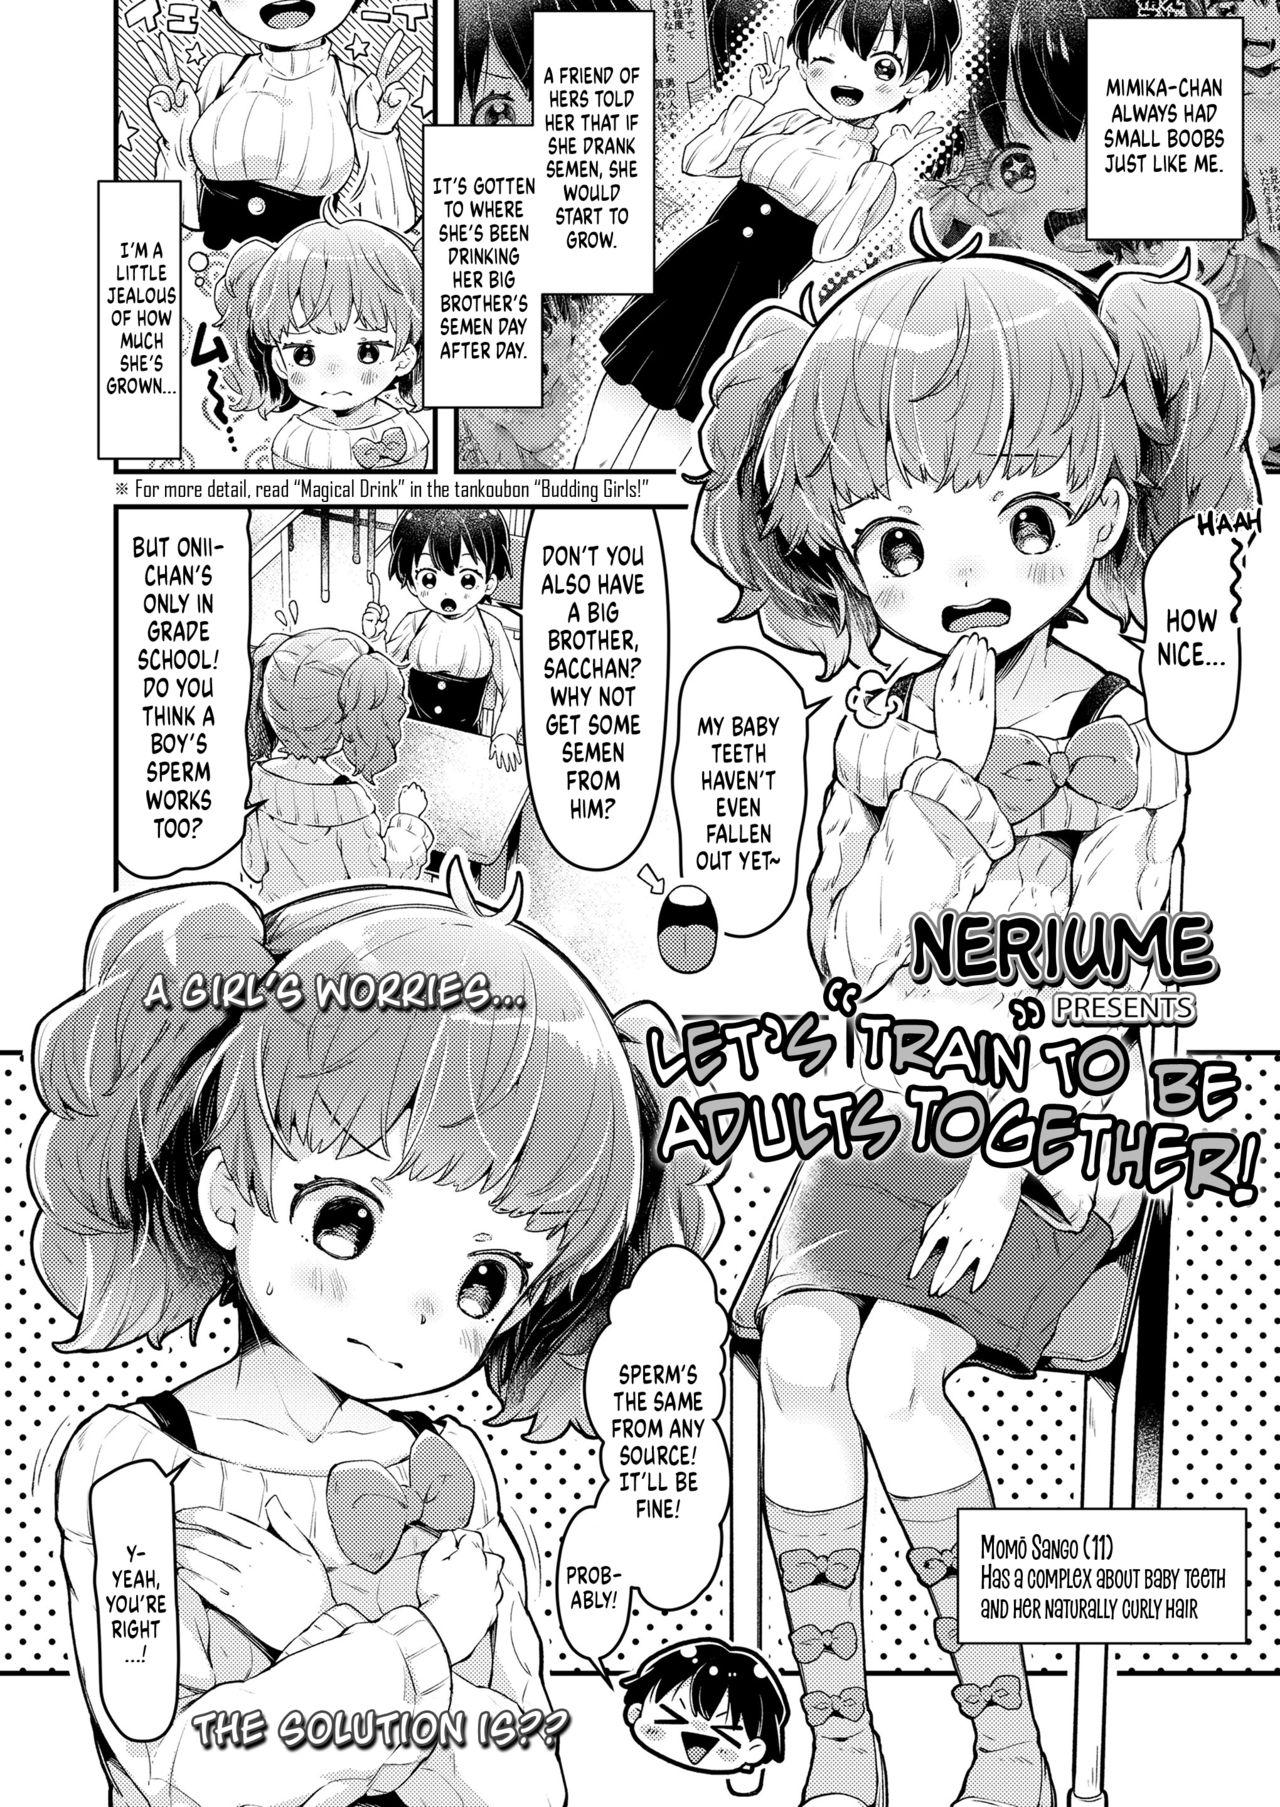 Gay Porn Issho ni Otona Training! | Let's Train to be Adults Together! Gang - Page 2